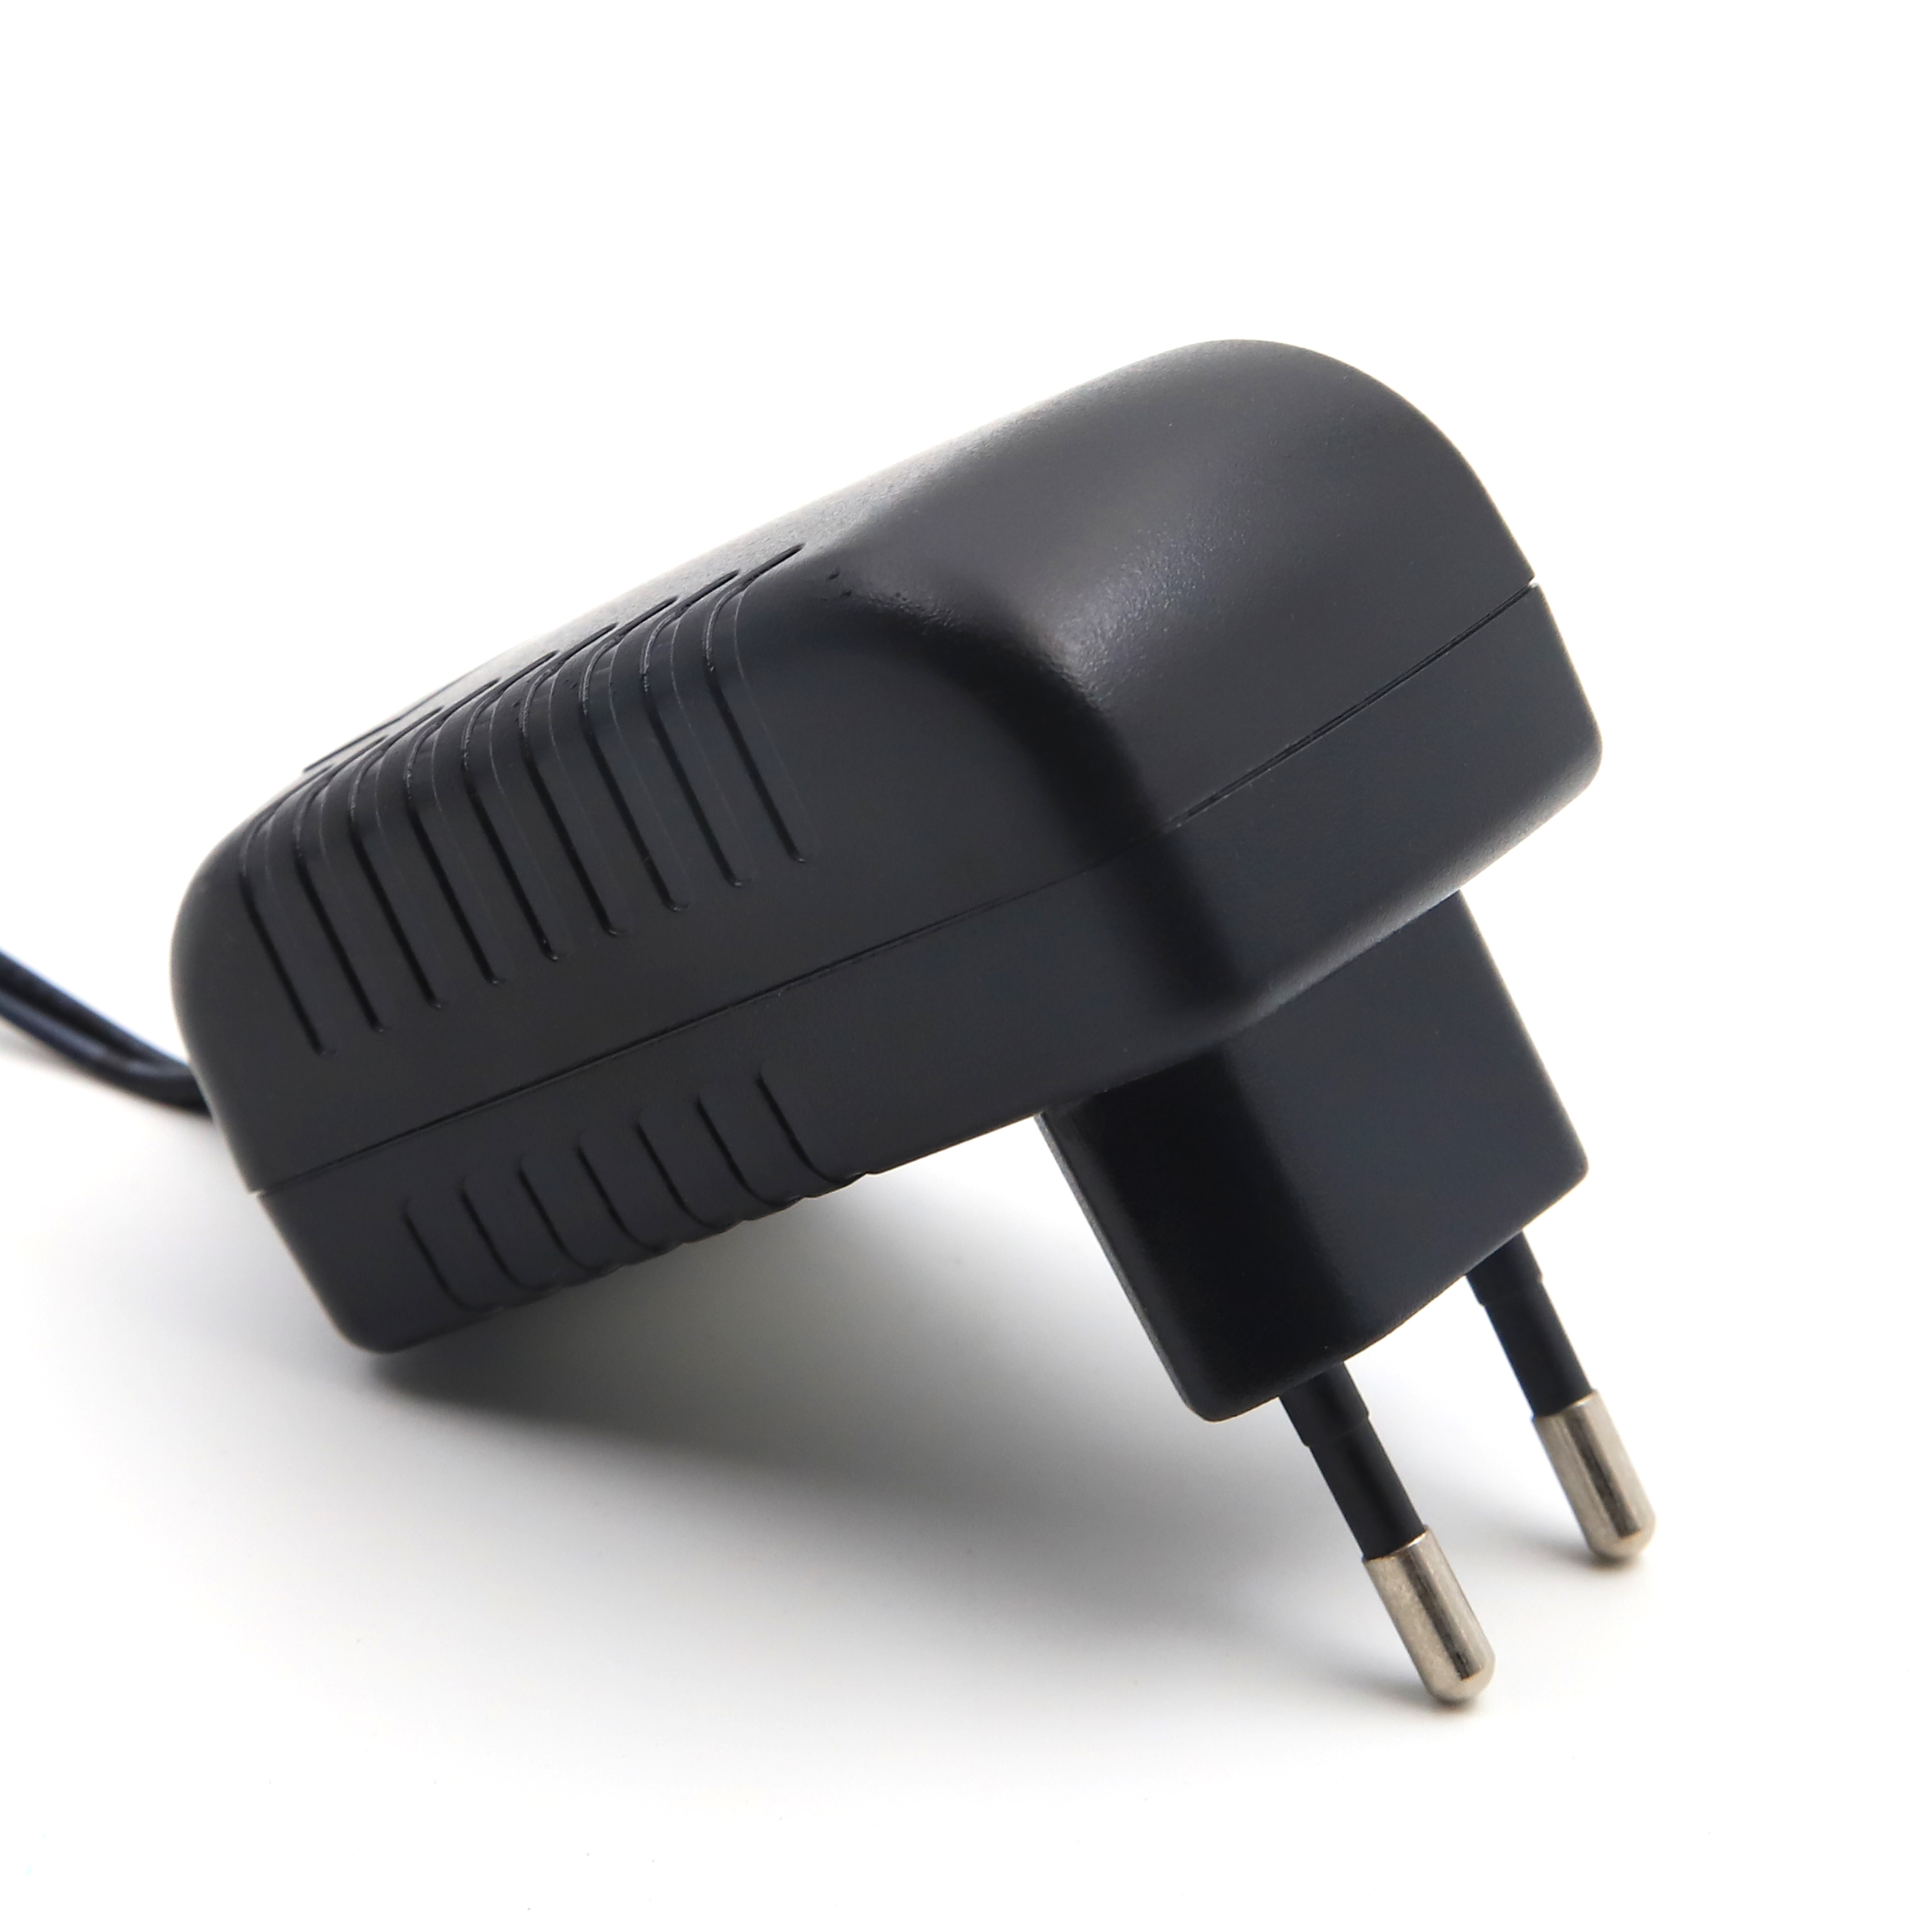 12V 1.5A 18W Wall Mount Power Adapter (8)